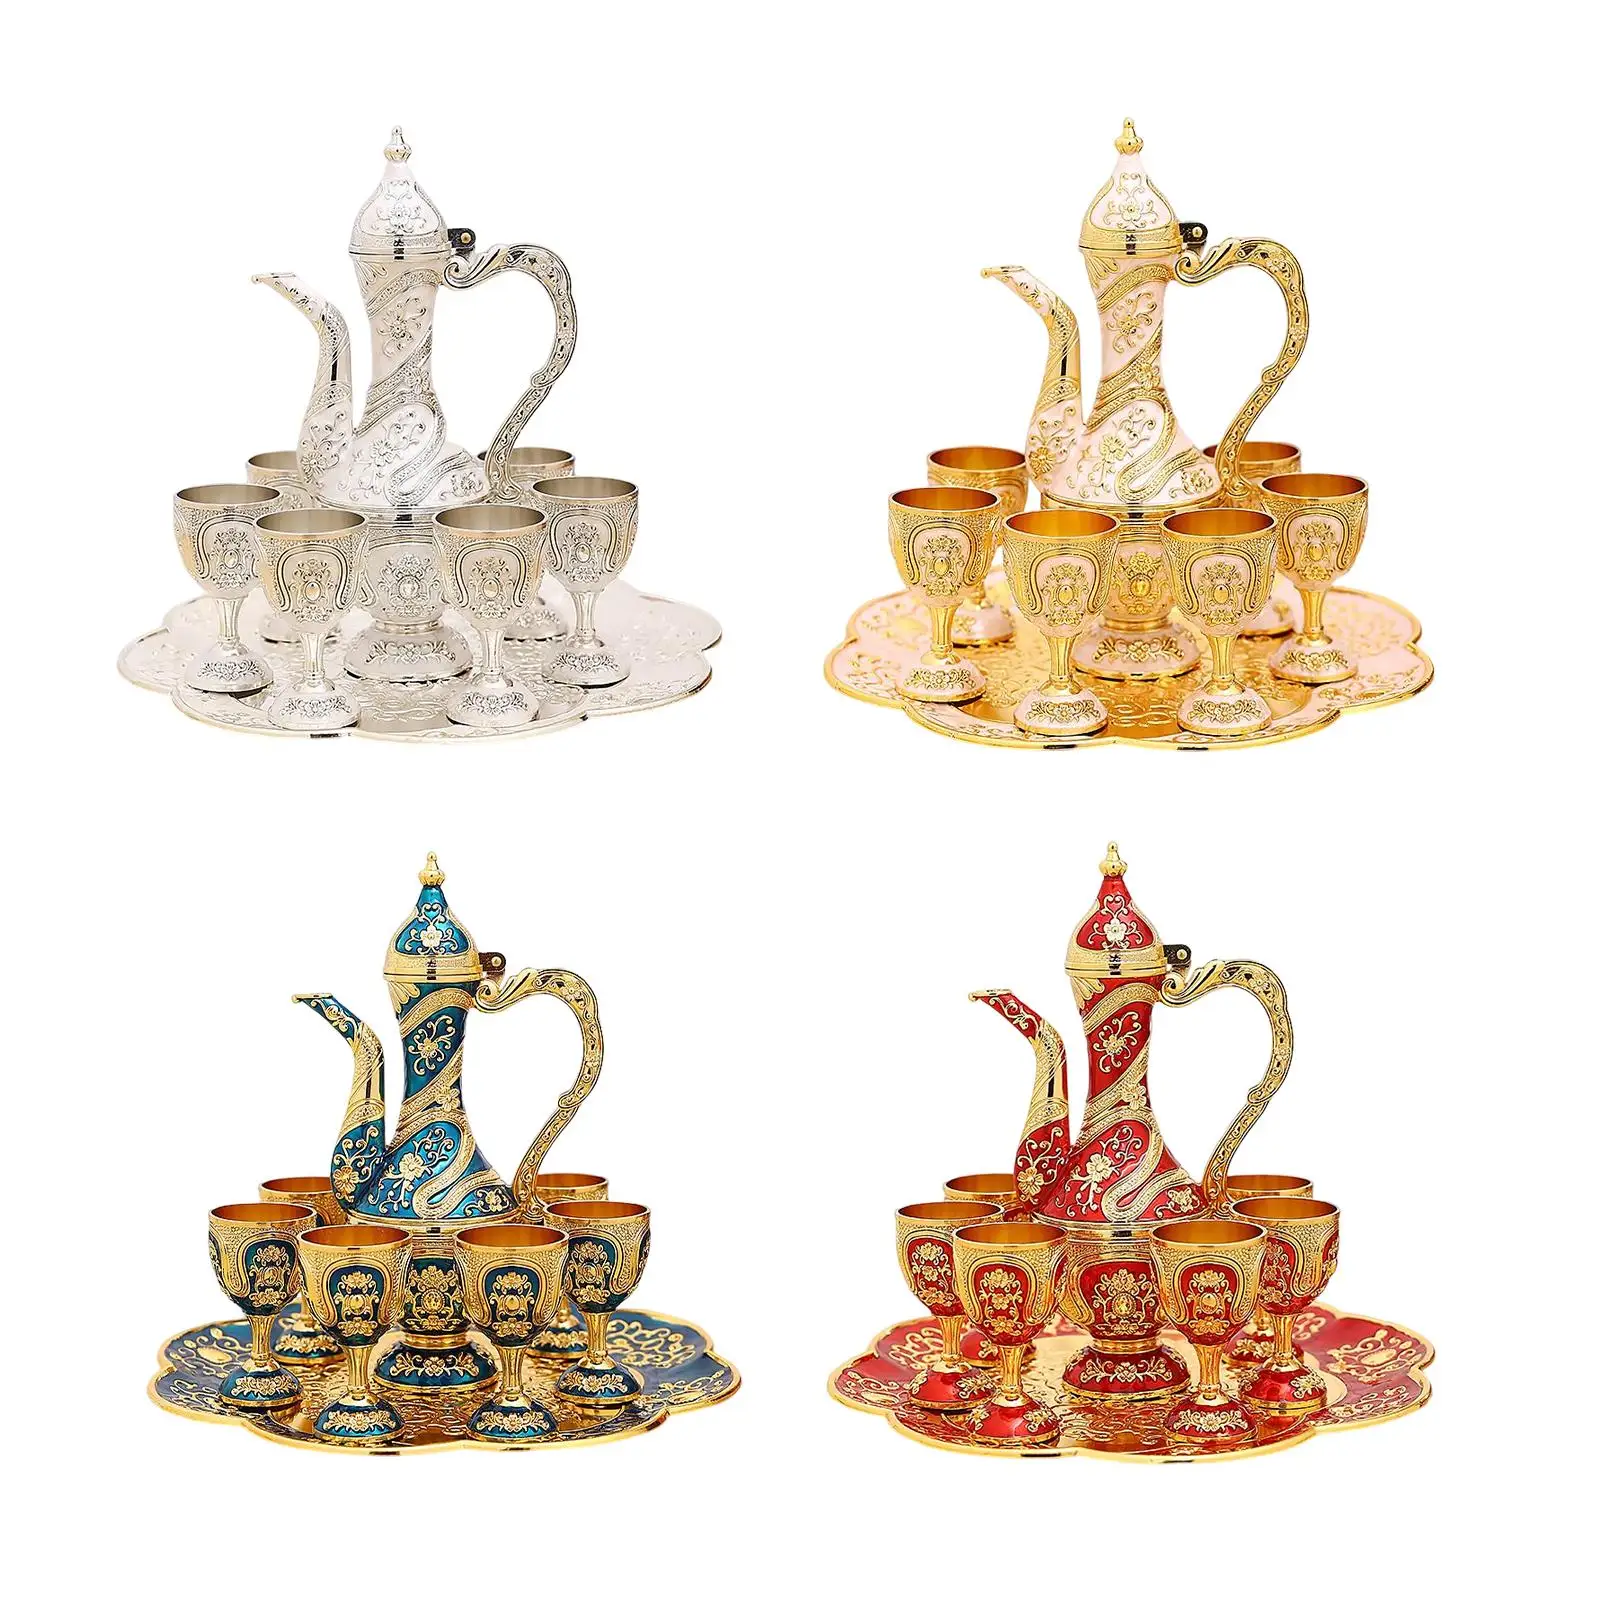 Vintage Turkish Coffee Pot Set Art Crafts Tea Sets with 6 Coffee Cups Crafts Tea Tray Teapot for Ornaments